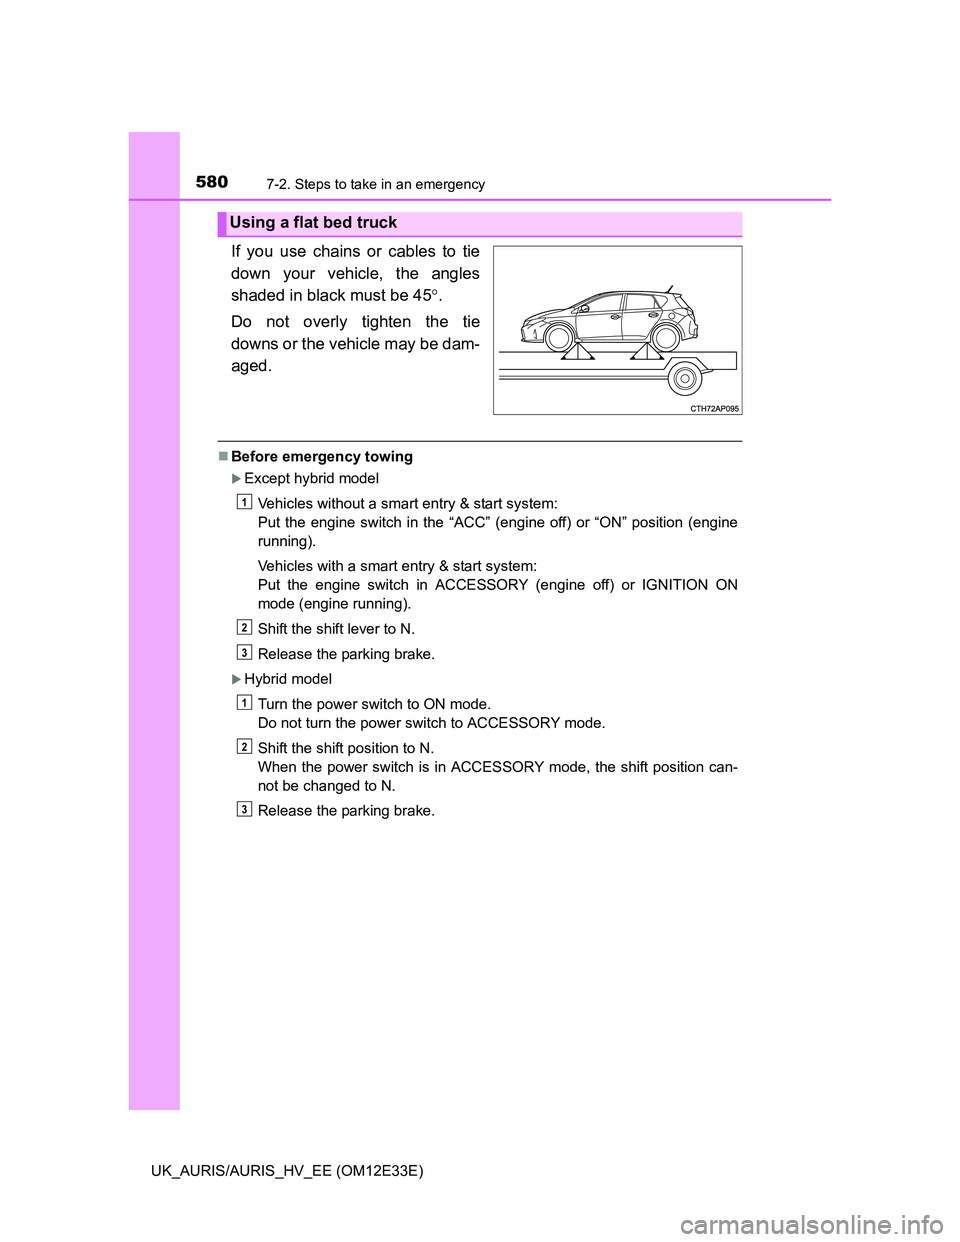 TOYOTA AURIS 2012  Owners Manual (in English) 5807-2. Steps to take in an emergency
UK_AURIS/AURIS_HV_EE (OM12E33E)
If you use chains or cables to tie
down your vehicle, the angles
shaded in black must be 45.
Do not overly tighten the tie
down